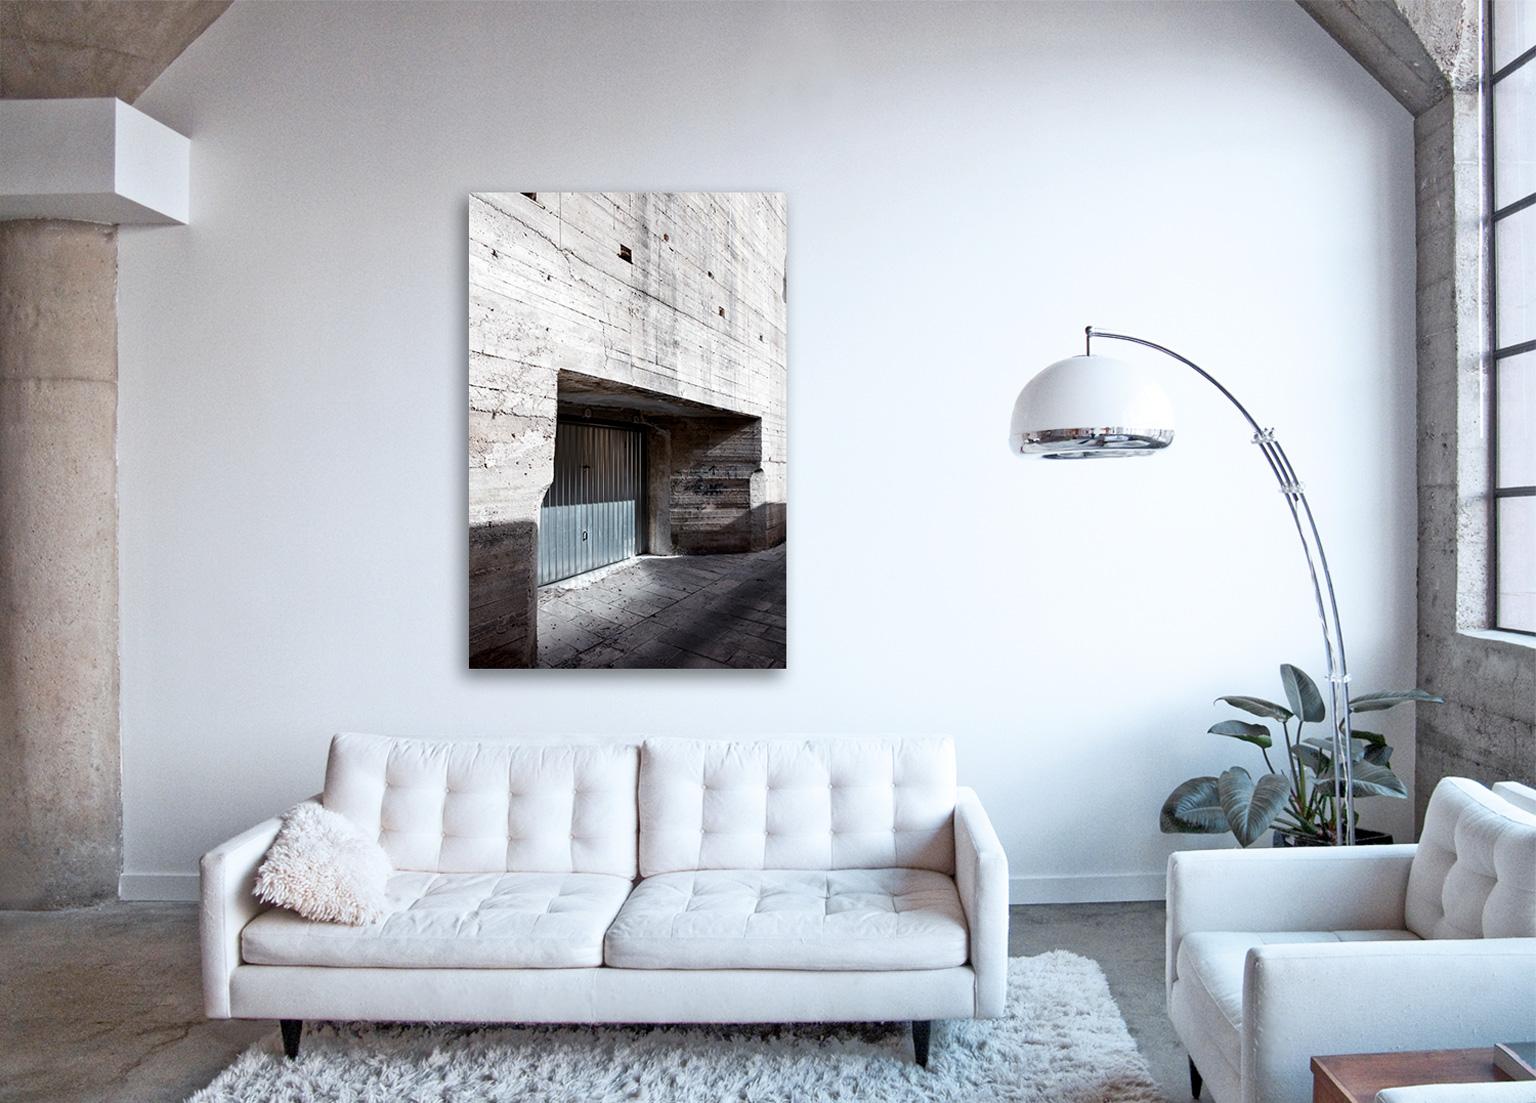 Large format photograph of Brutalist architecture in south of Italy ( Sicily )
 
Modica (2020)
by Frank Schott 

40 x 27 inches / 102cm x 68cm
signed edition of 25

72 x 48 inches / 182cm x 122cm
signed edition of 7

archival quality fine art